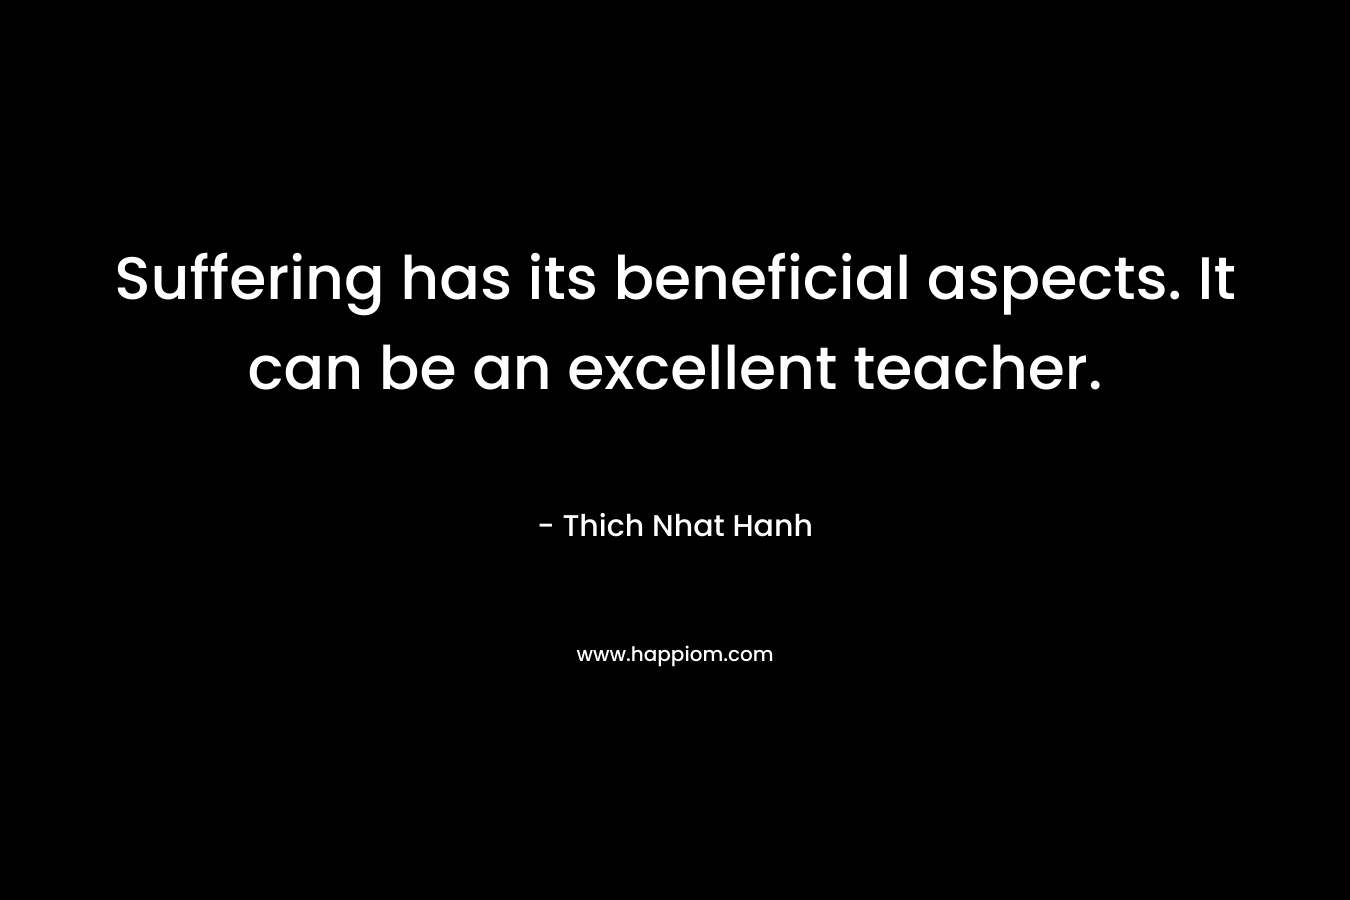 Suffering has its beneficial aspects. It can be an excellent teacher. – Thich Nhat Hanh